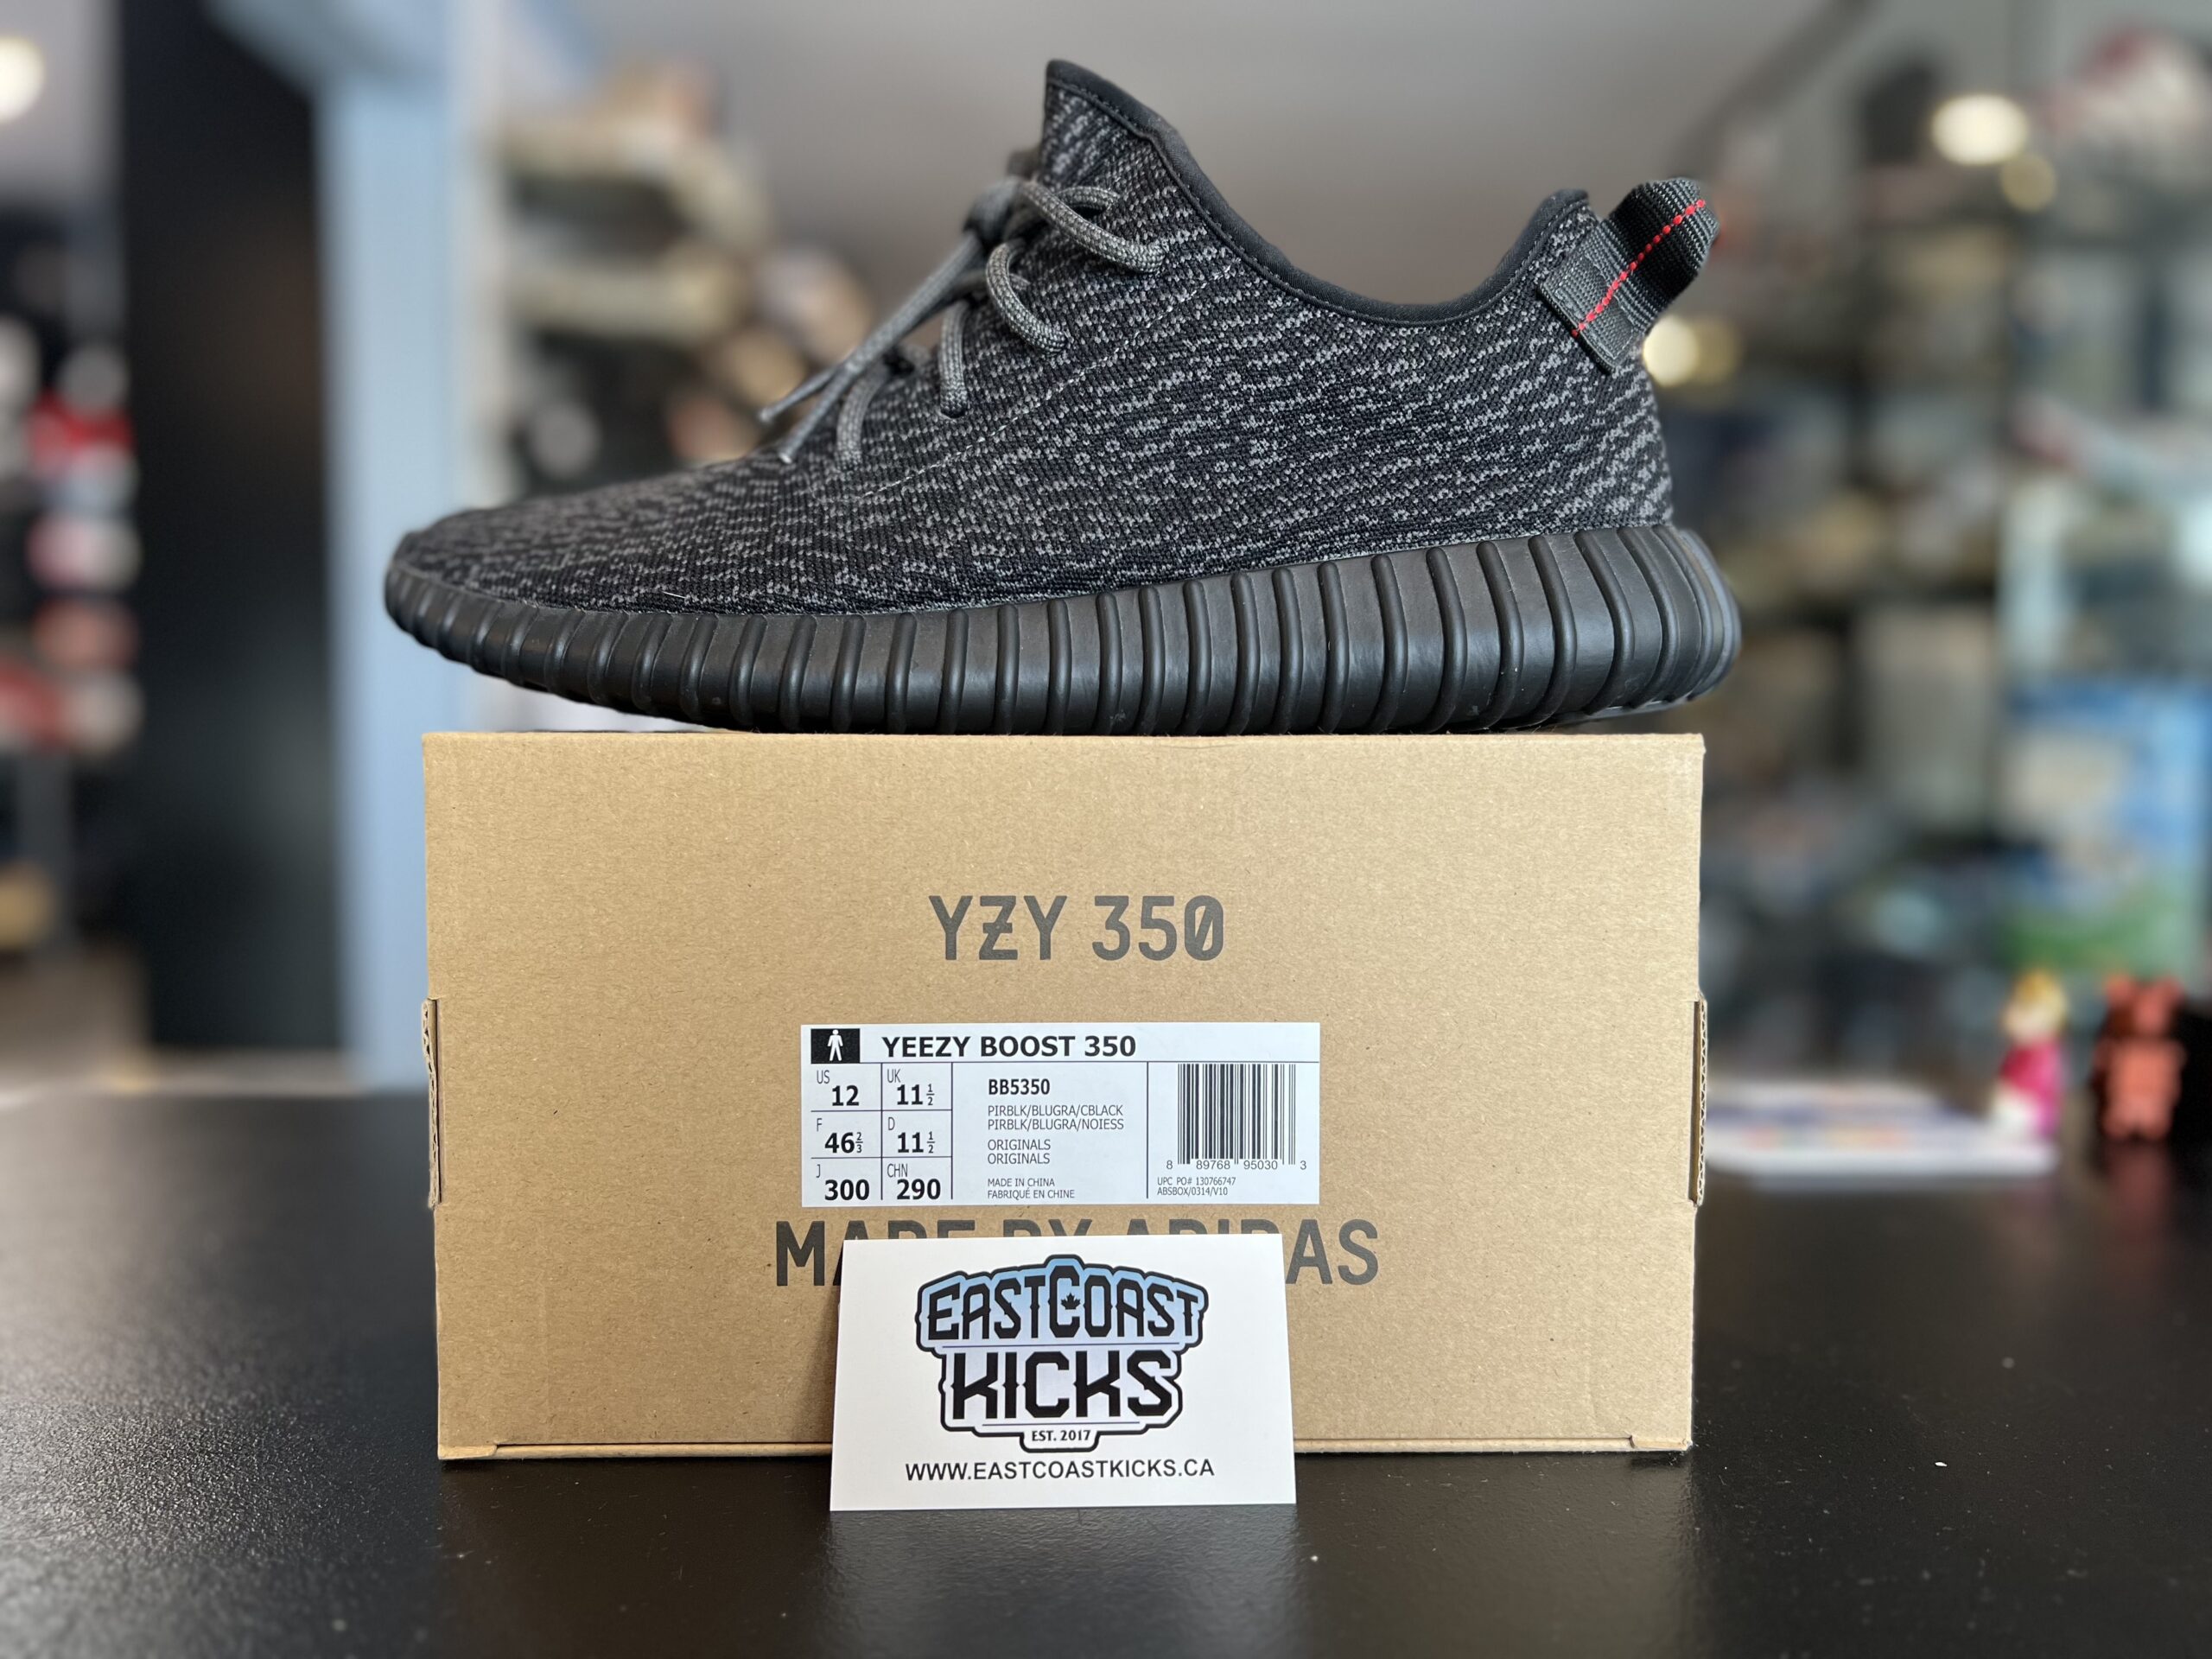 Preowned Adidas Yeezy Boost 350 Pirate Black Size 12